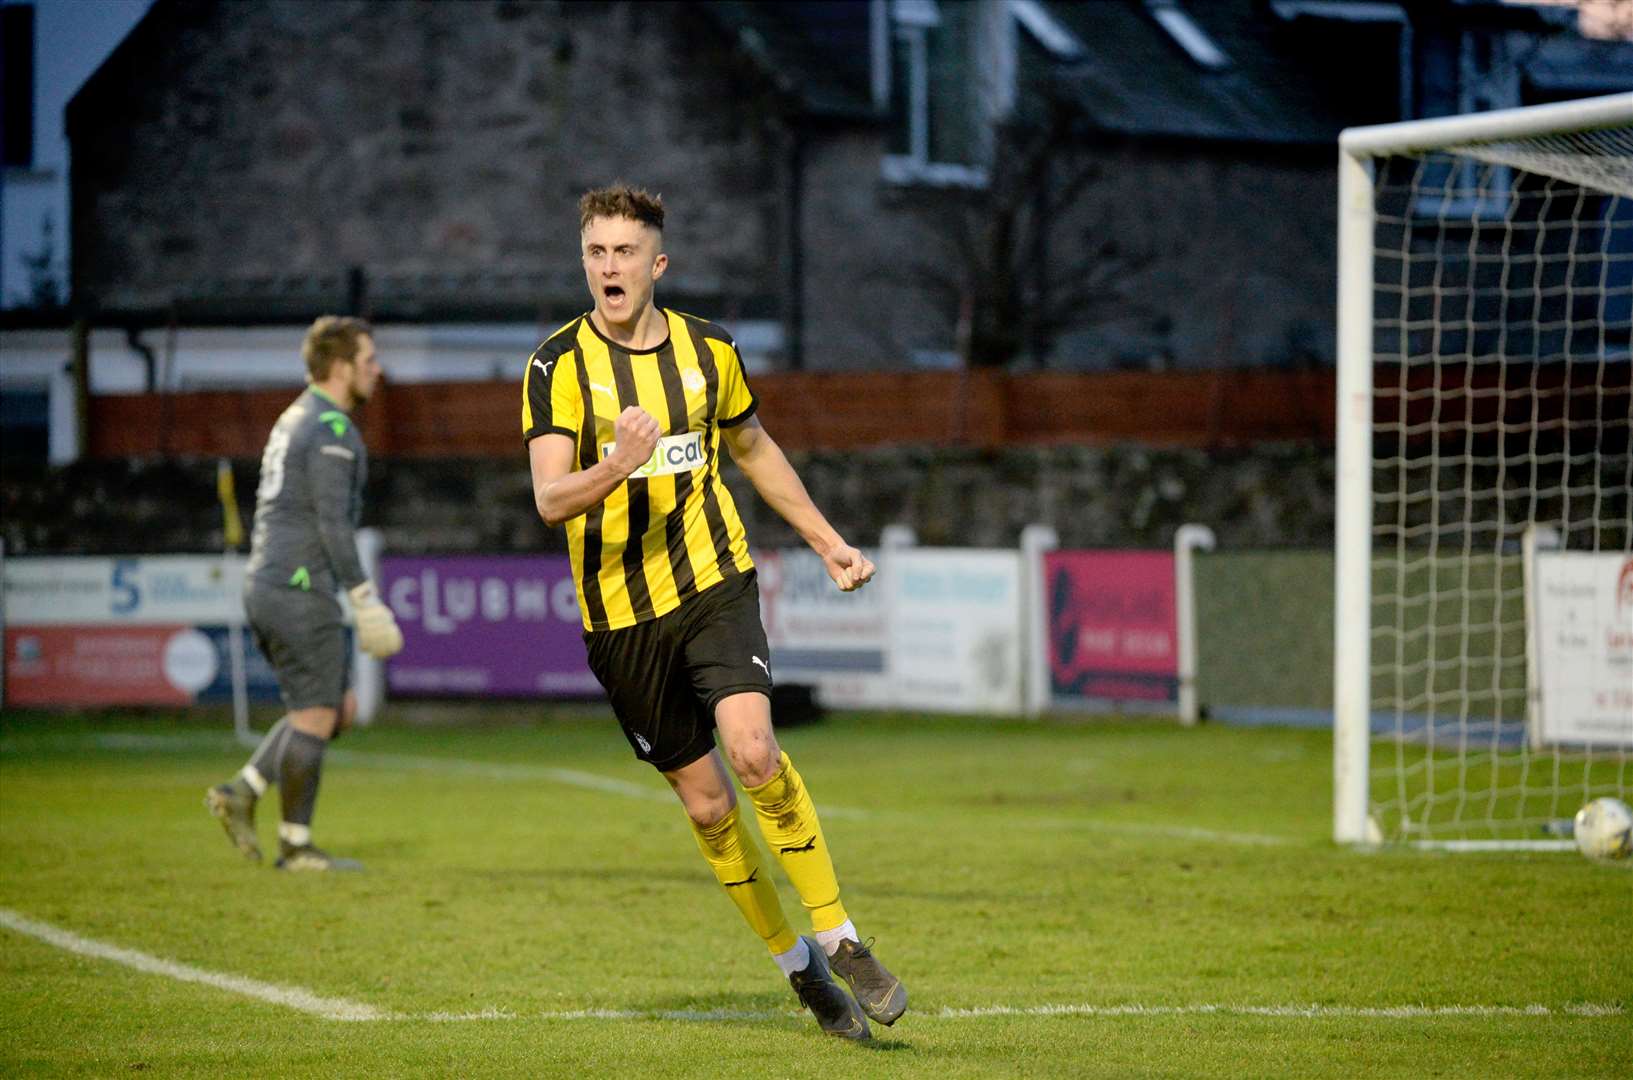 Scott Davidson's strike against Strathspey Thistle was voted goal of the month for January. Picture: James MacKenzie